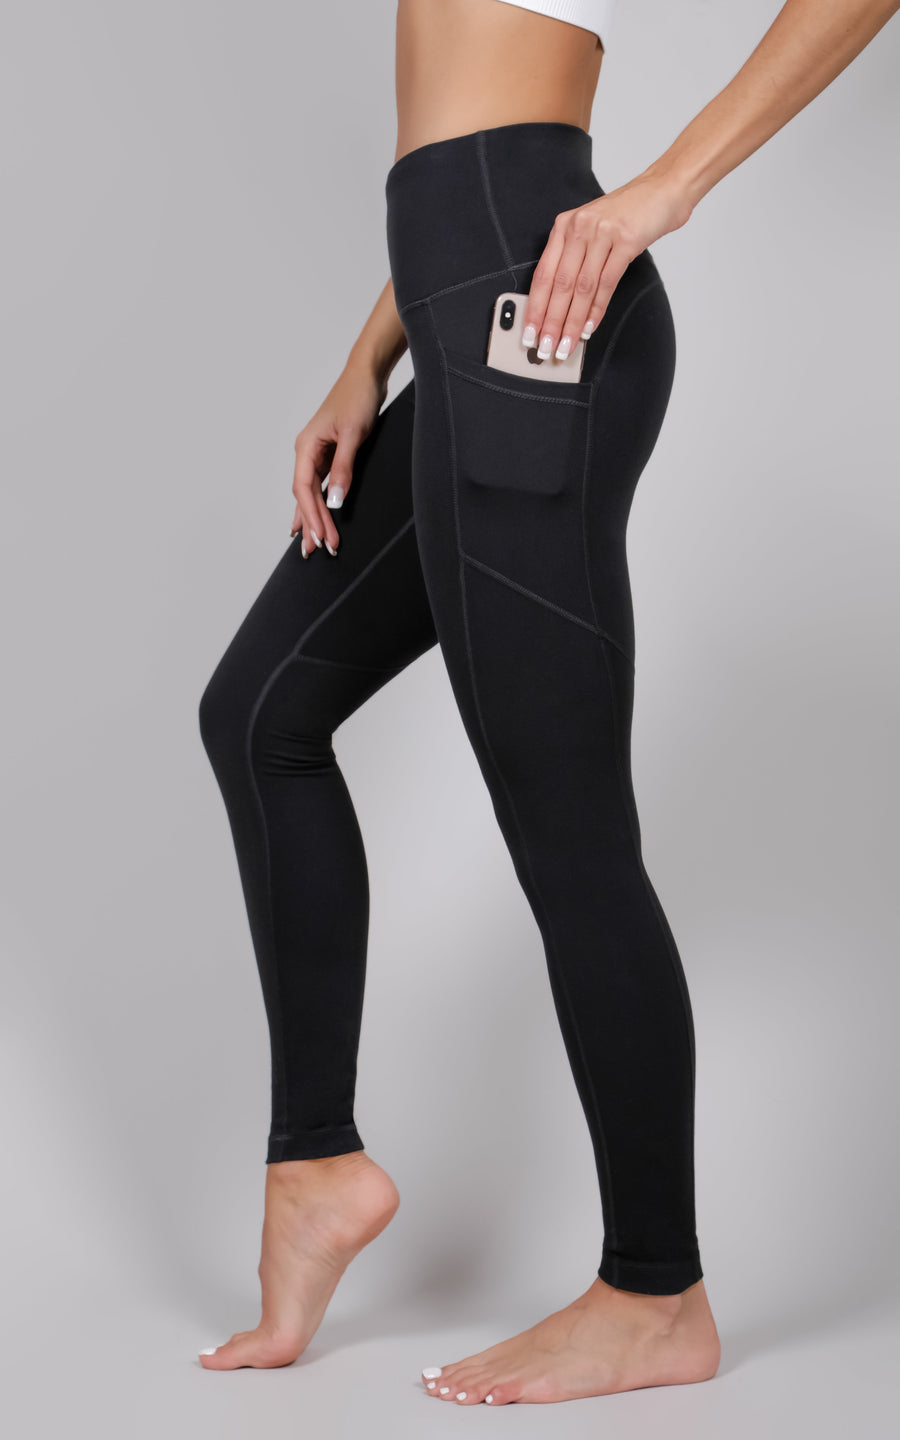 Workout Leggings For Curvy  90 Degrees by Reflex Workout Leggings 